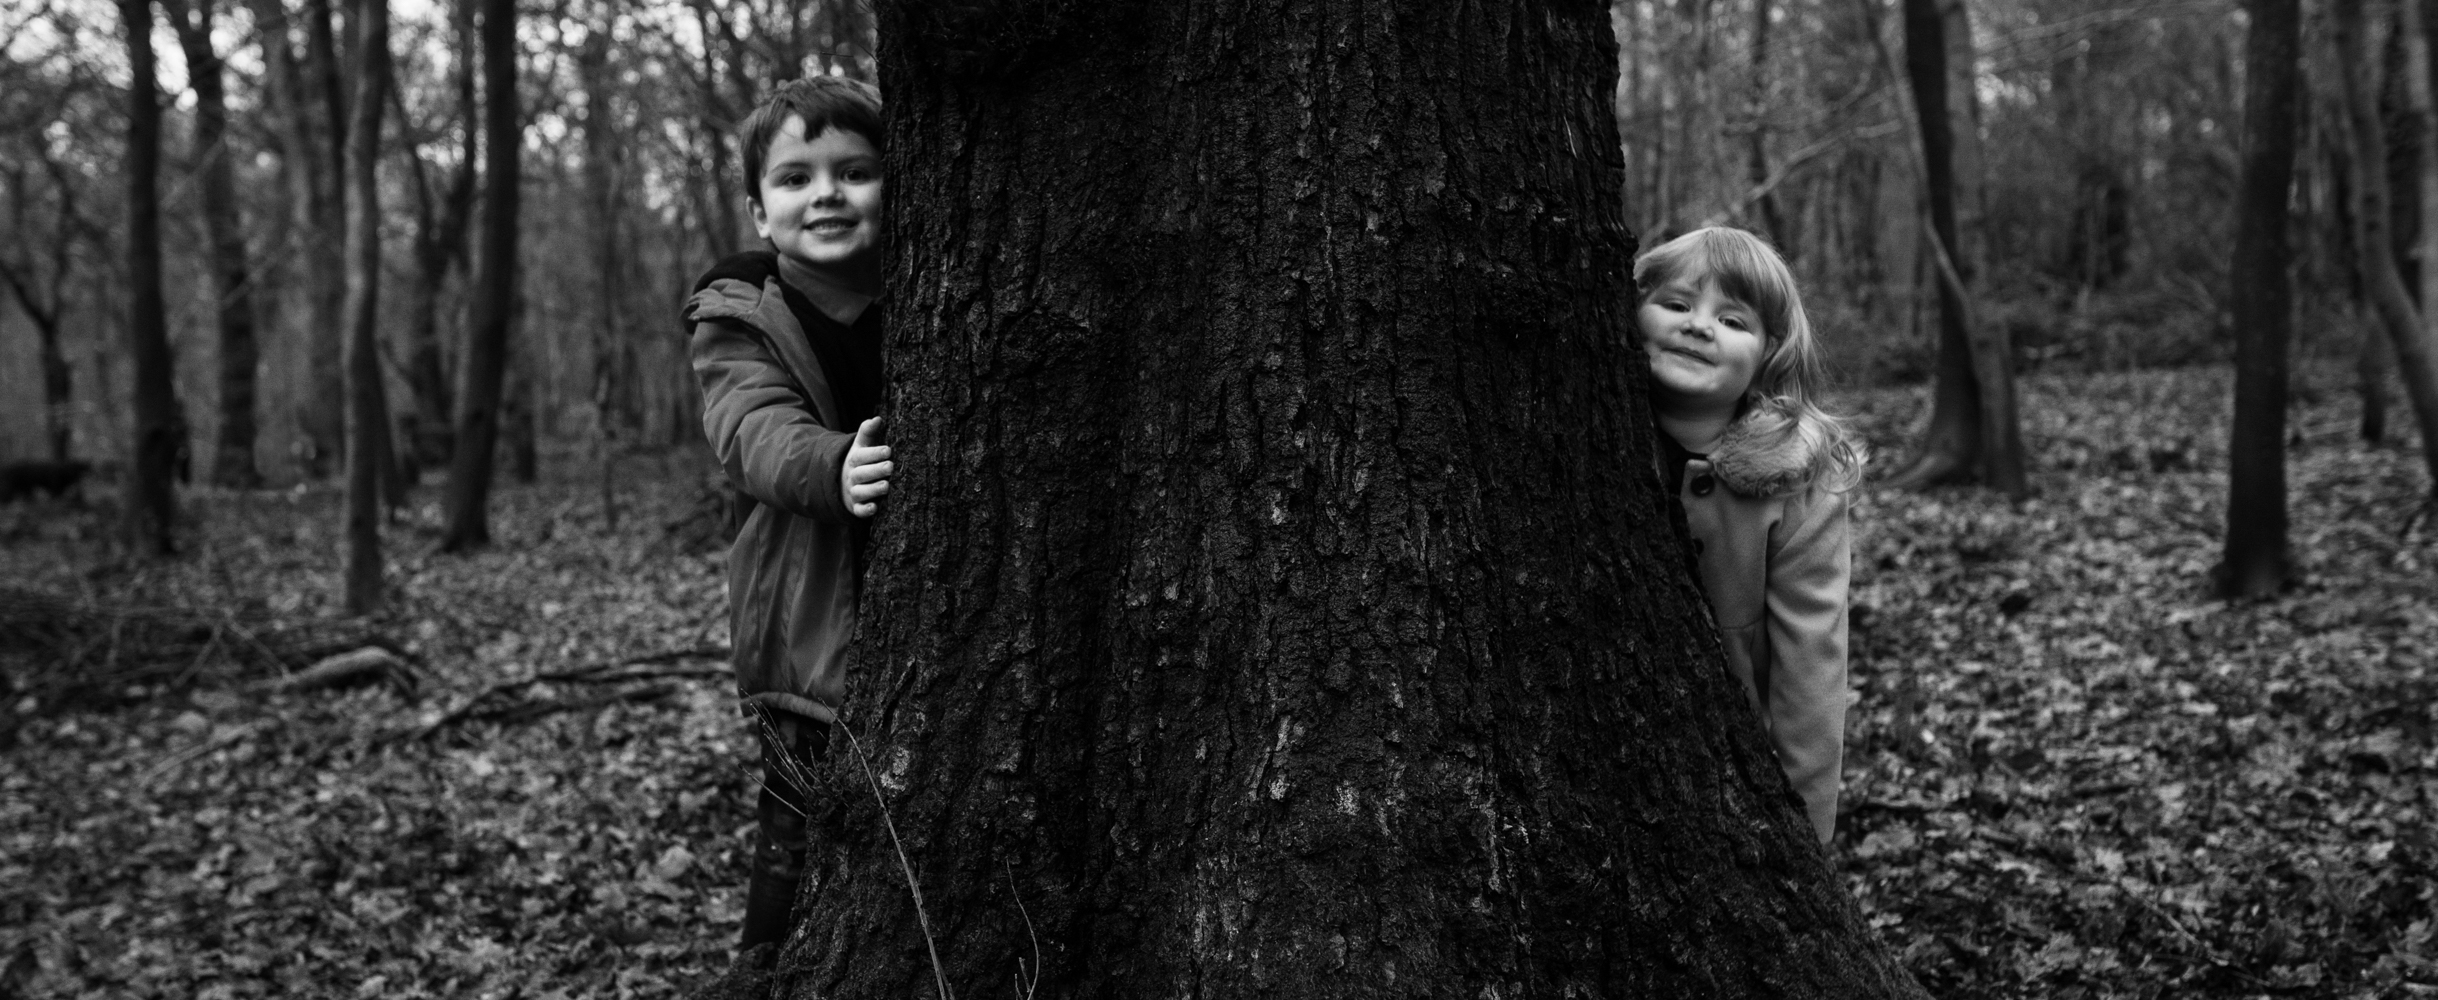 A black and white photograph of two kids peeping around a tree in the woods